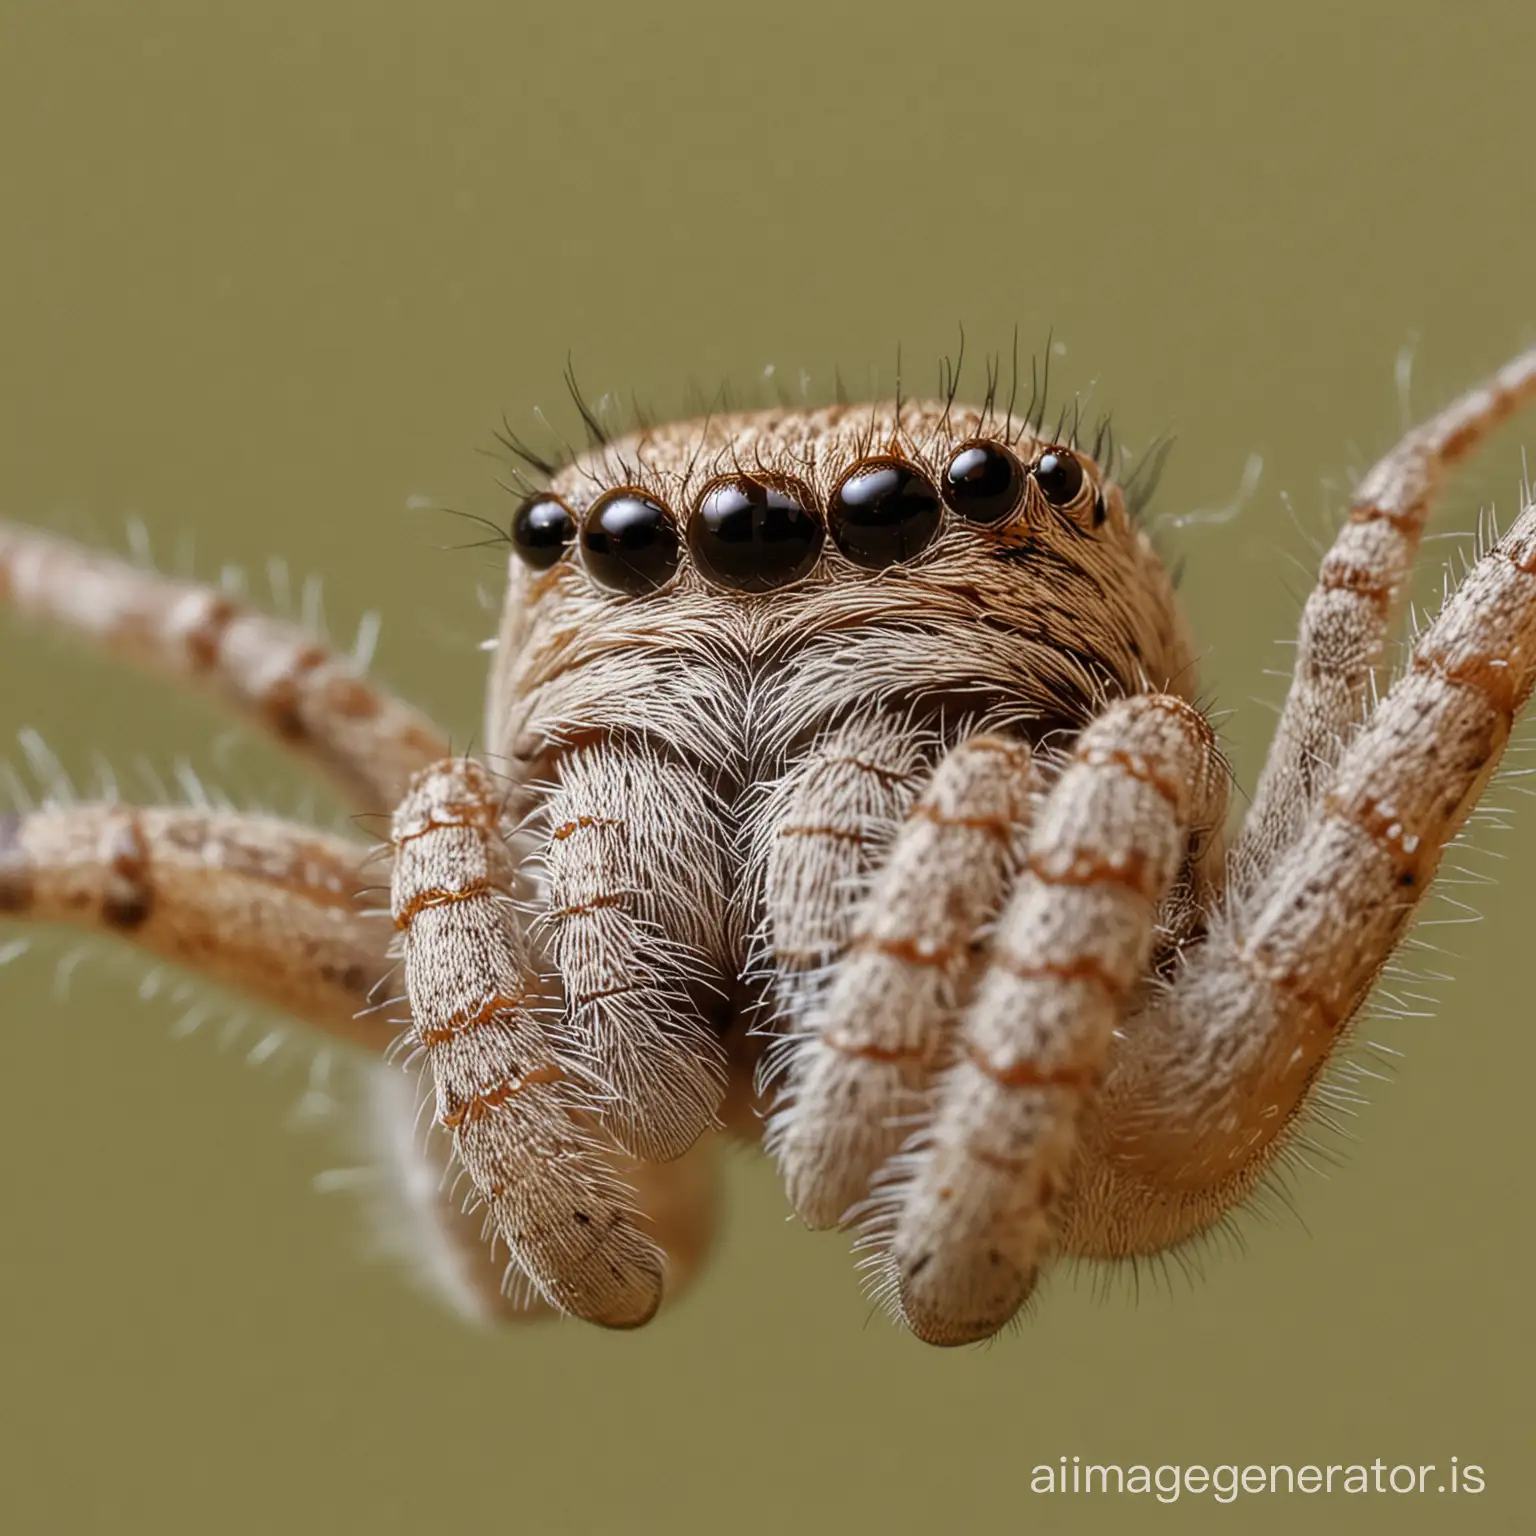 Spider-with-Closed-Eyes-in-Clear-View